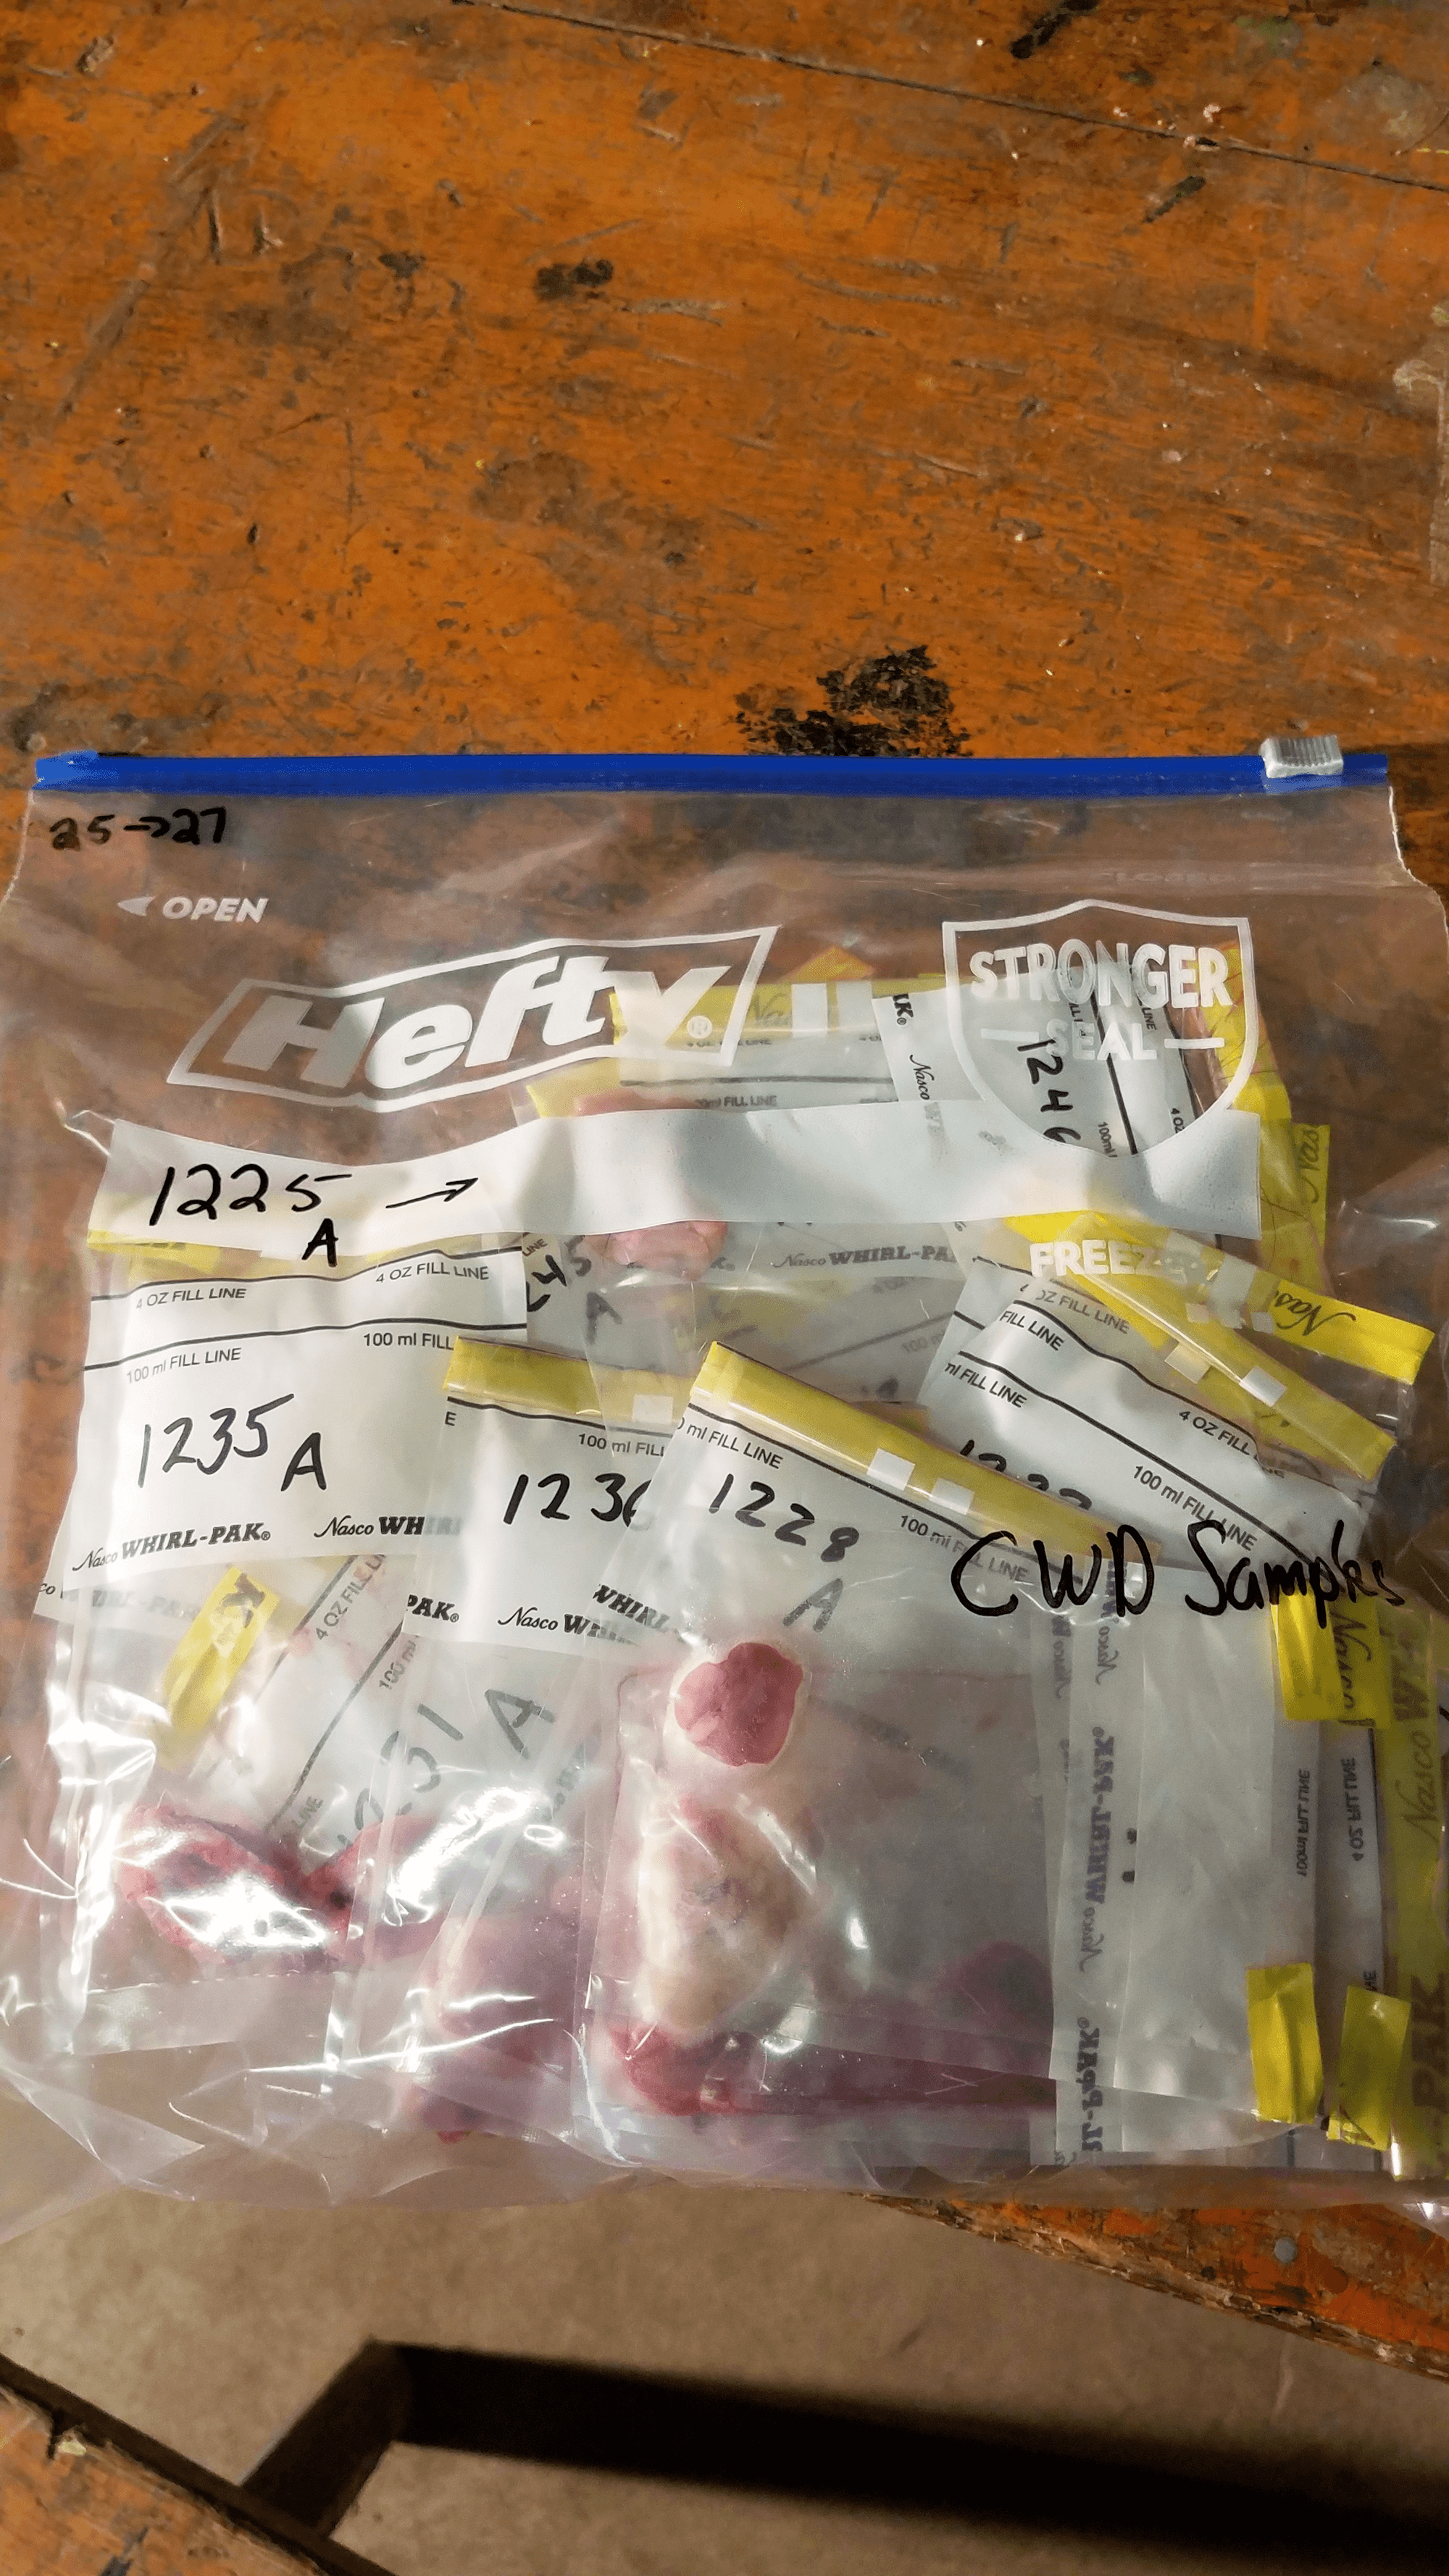 A gallon sized Hefty zip-seal bag filled with samples. In black sharpie, the large bag is labeled "CWD Samples"